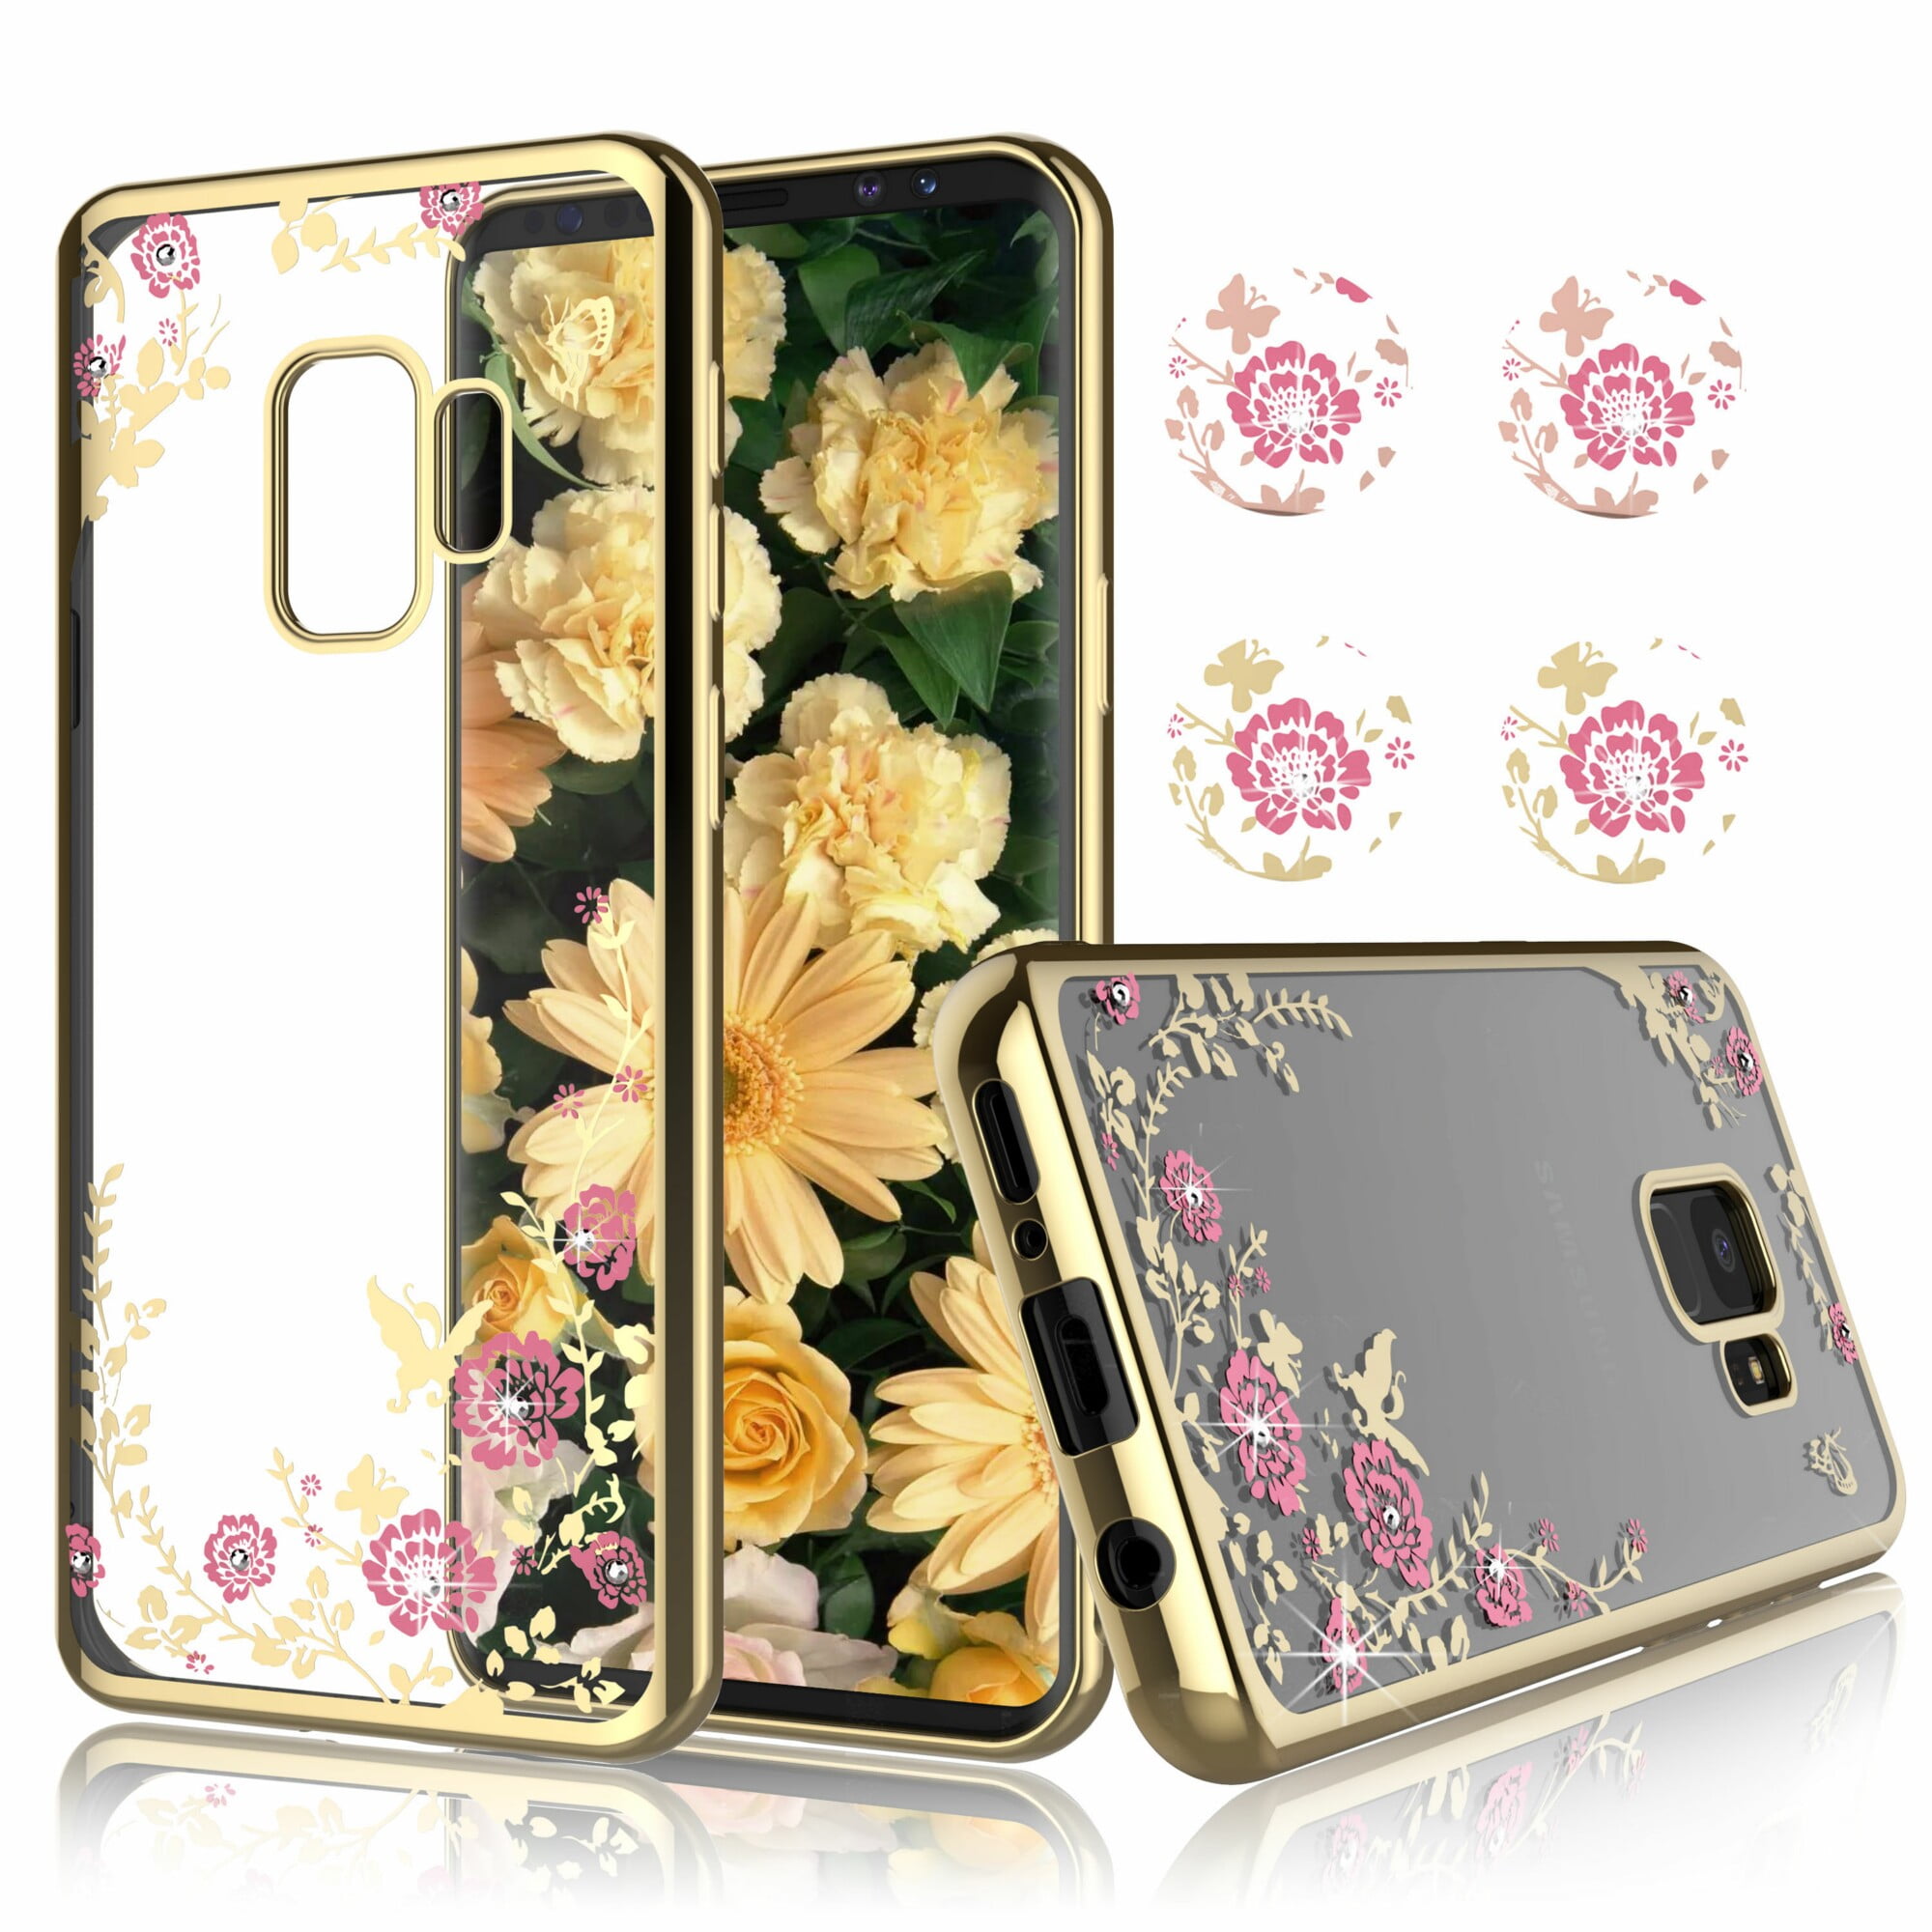 Galaxy S9 Case, Samsung S9 Fashion Case, Njjex Ultra Thin TPU Case With Bling Diamond Cover For Samsung Galaxy S9 Released on 2018 -Champagne Gold